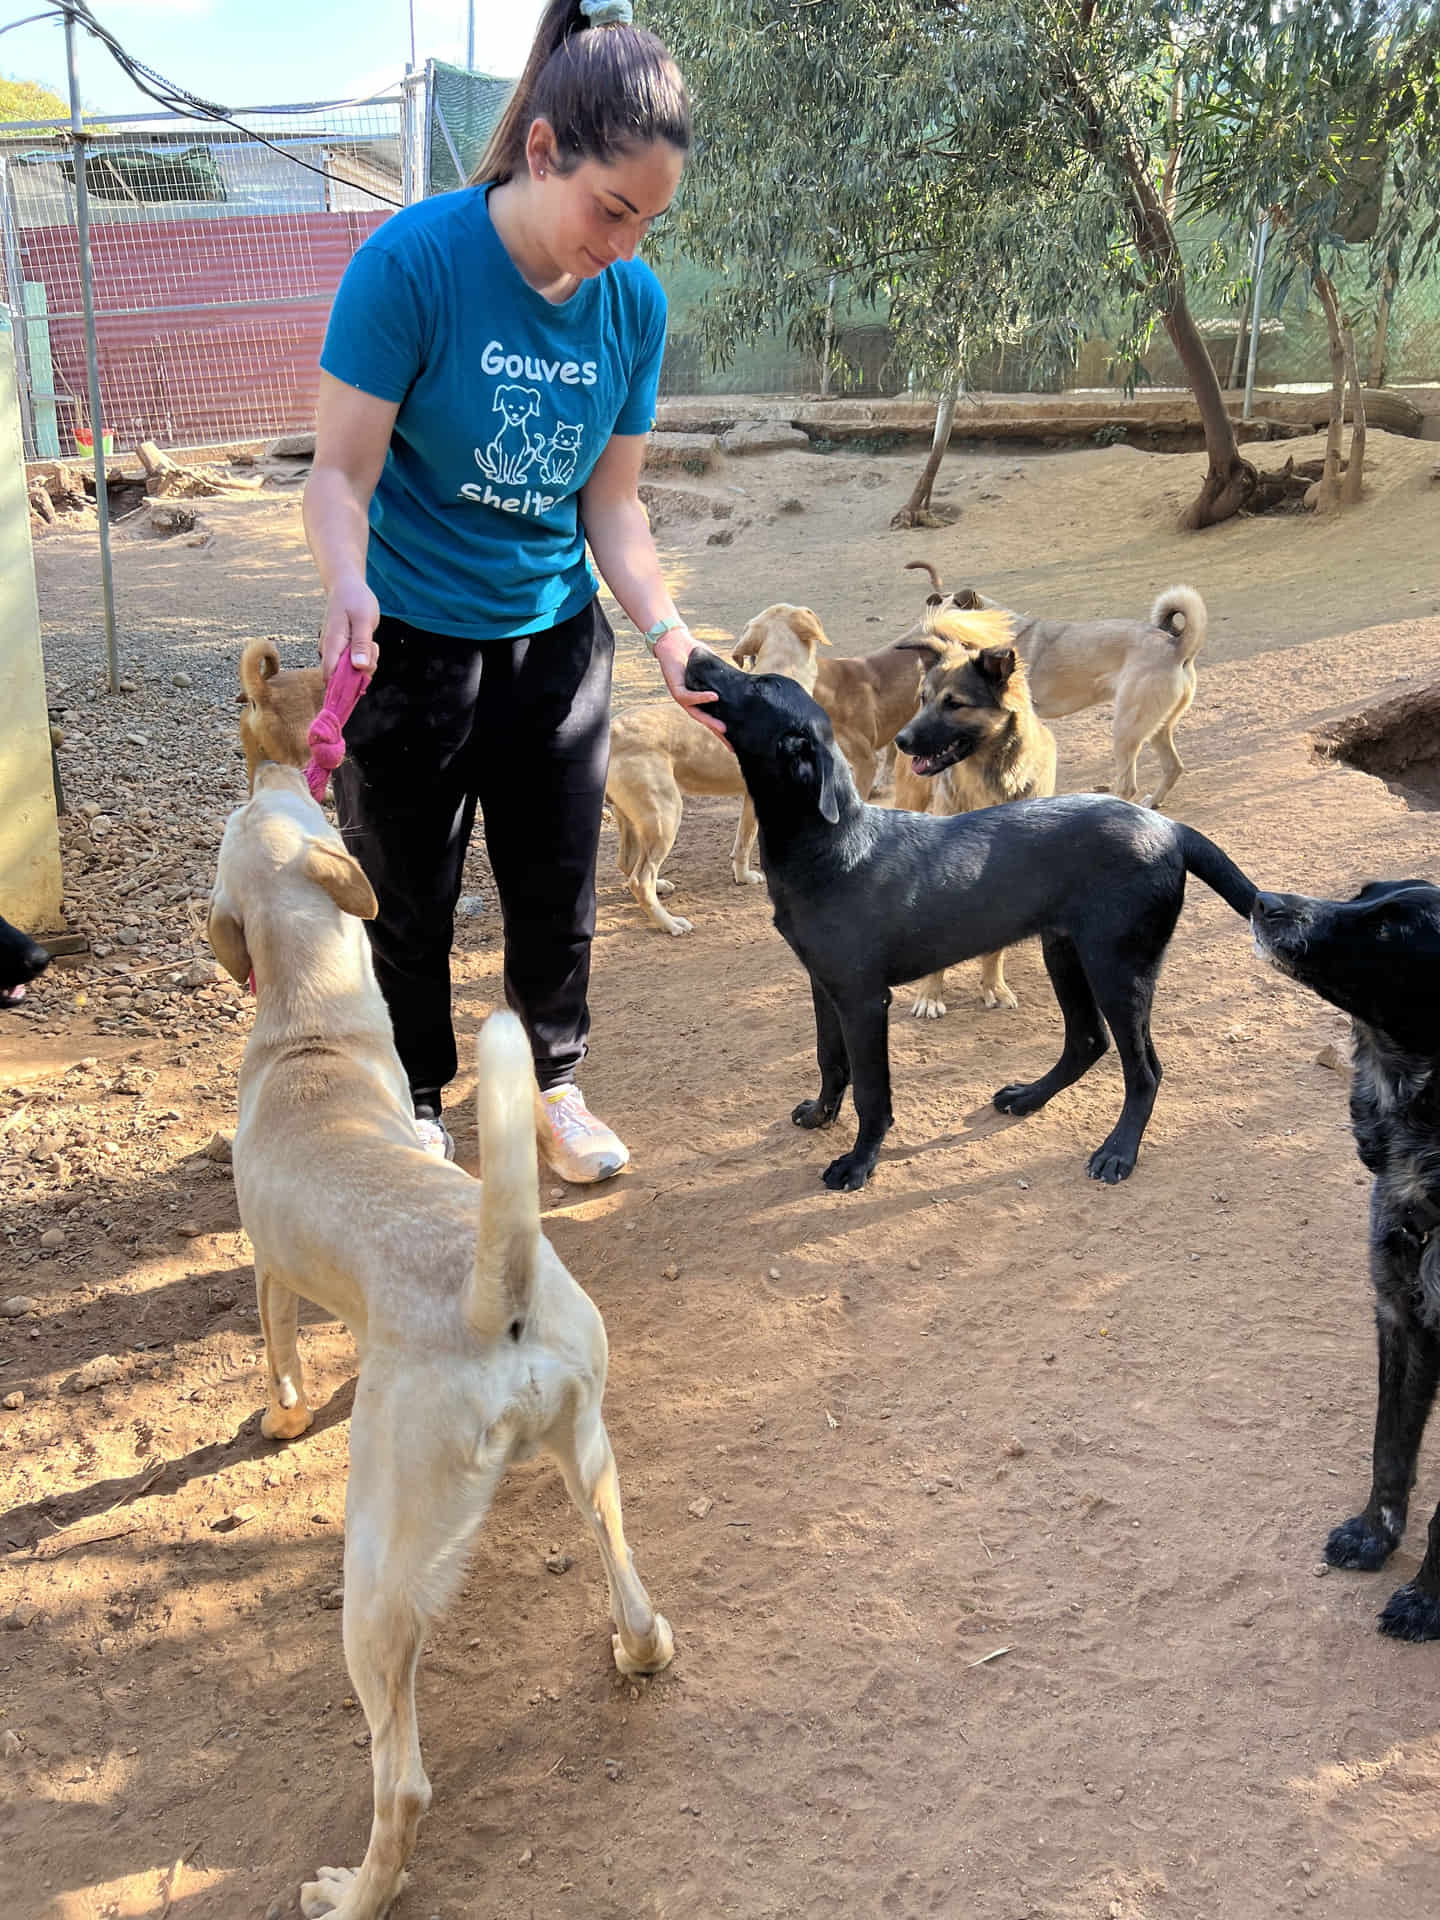 Volunteering at the Gouves Animal Shelter in Crete - Header